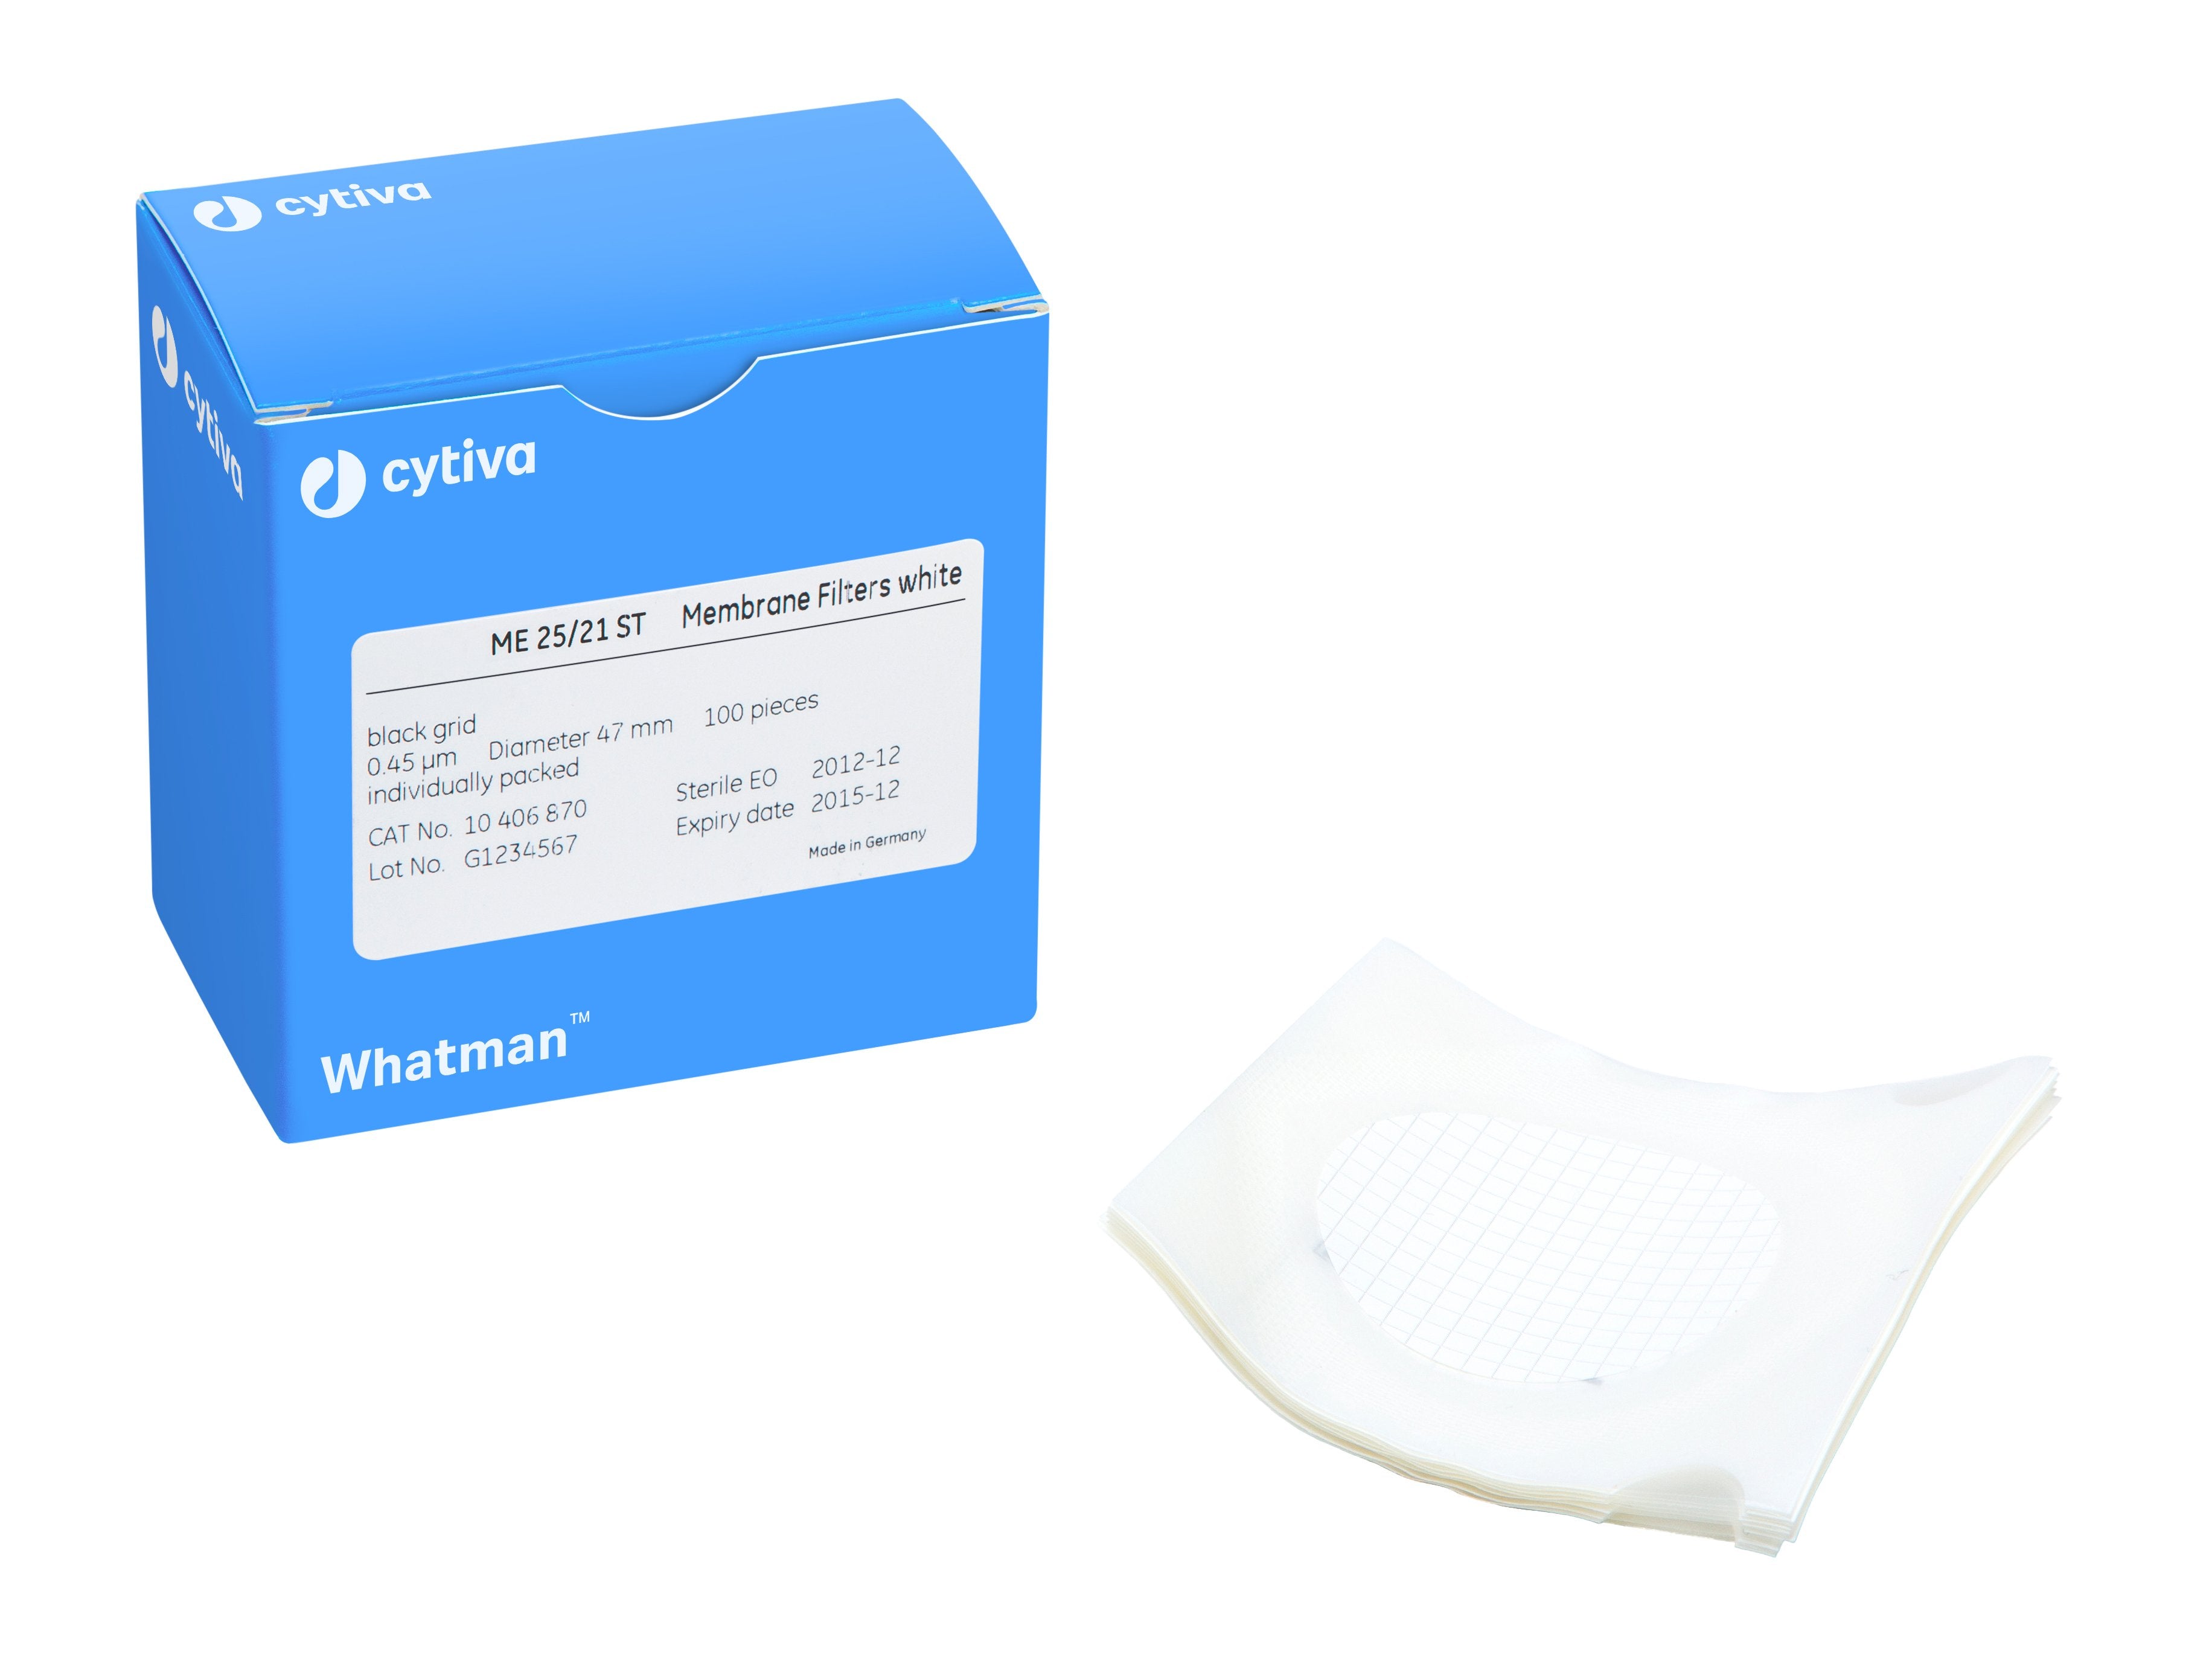 Whatman 7141-154 Filter Circles, 47mm Dia, Mixed Cellulose Ester WME White/ Black Grid 3.1mm without Pad, Sterile, 0.45 micrometer Pore Size, 1000/pk (PN: 7141-154)